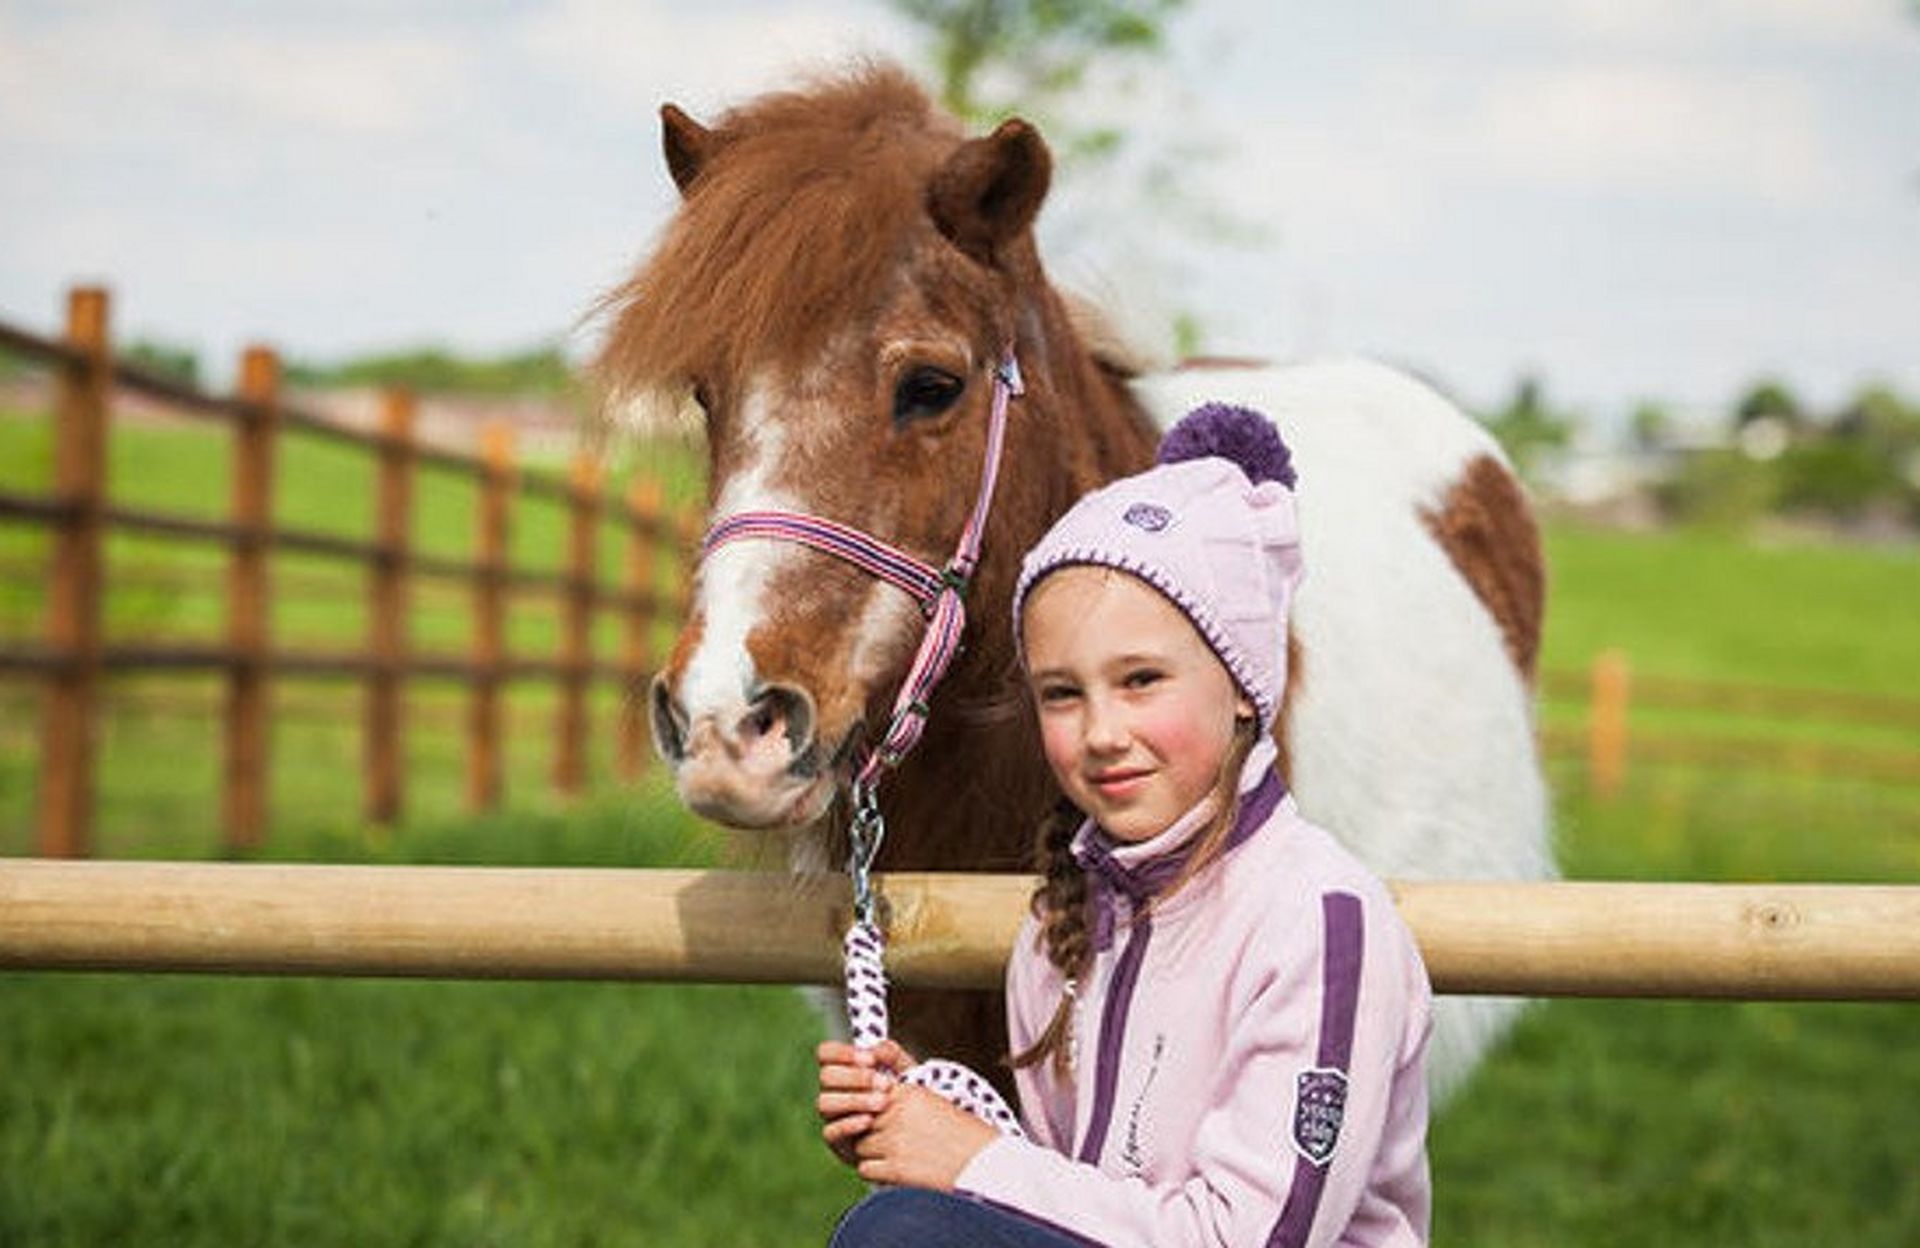 16 Life Lessons Your First Pony Taught You